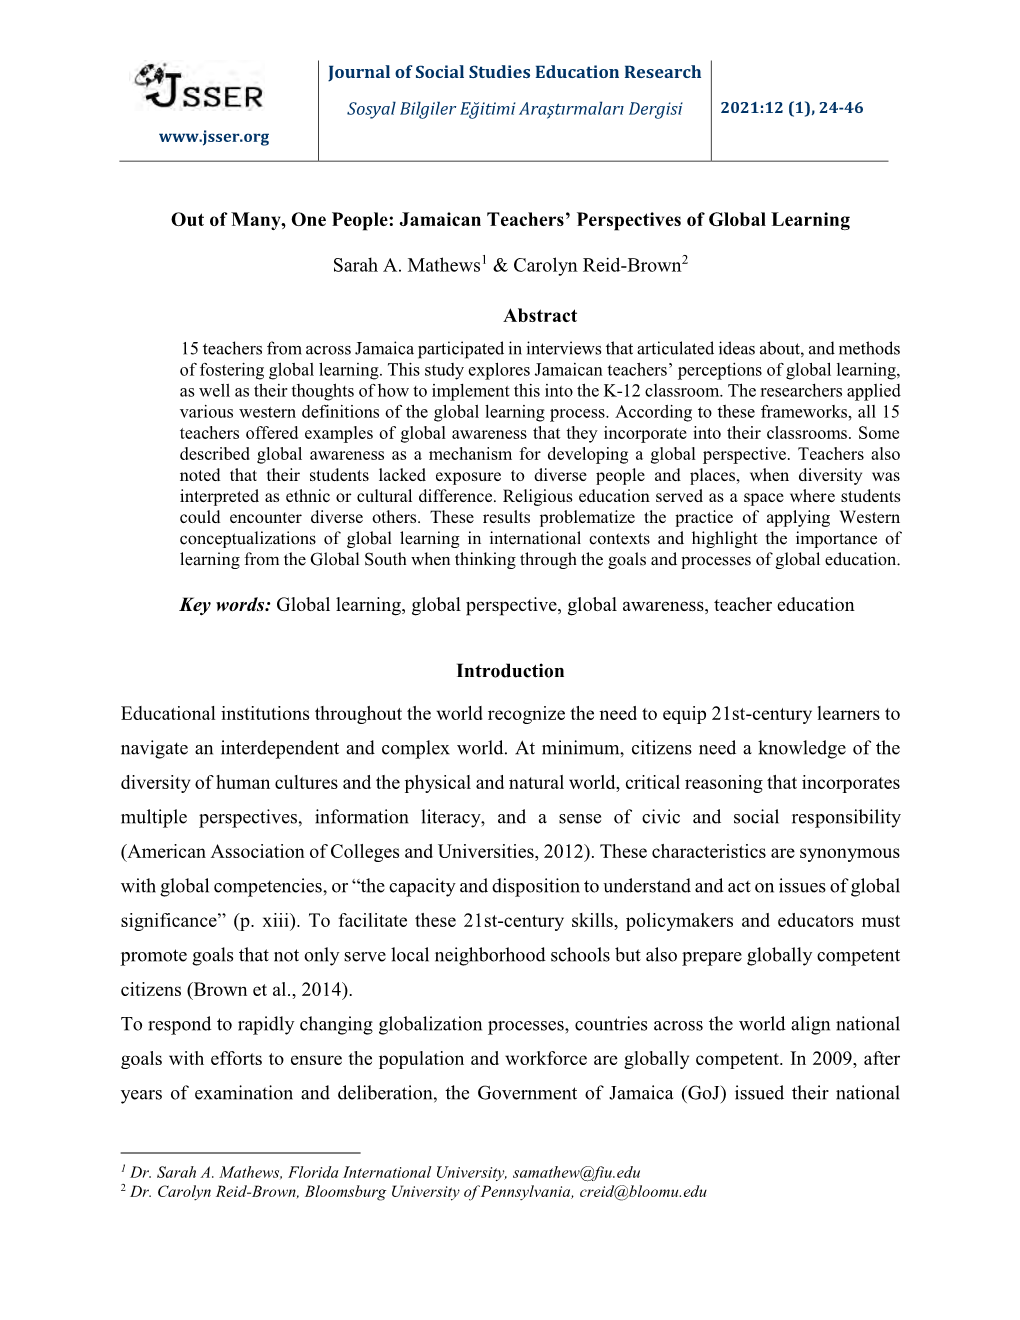 Jamaican Teachers' Perspectives of Global Learning Sarah A